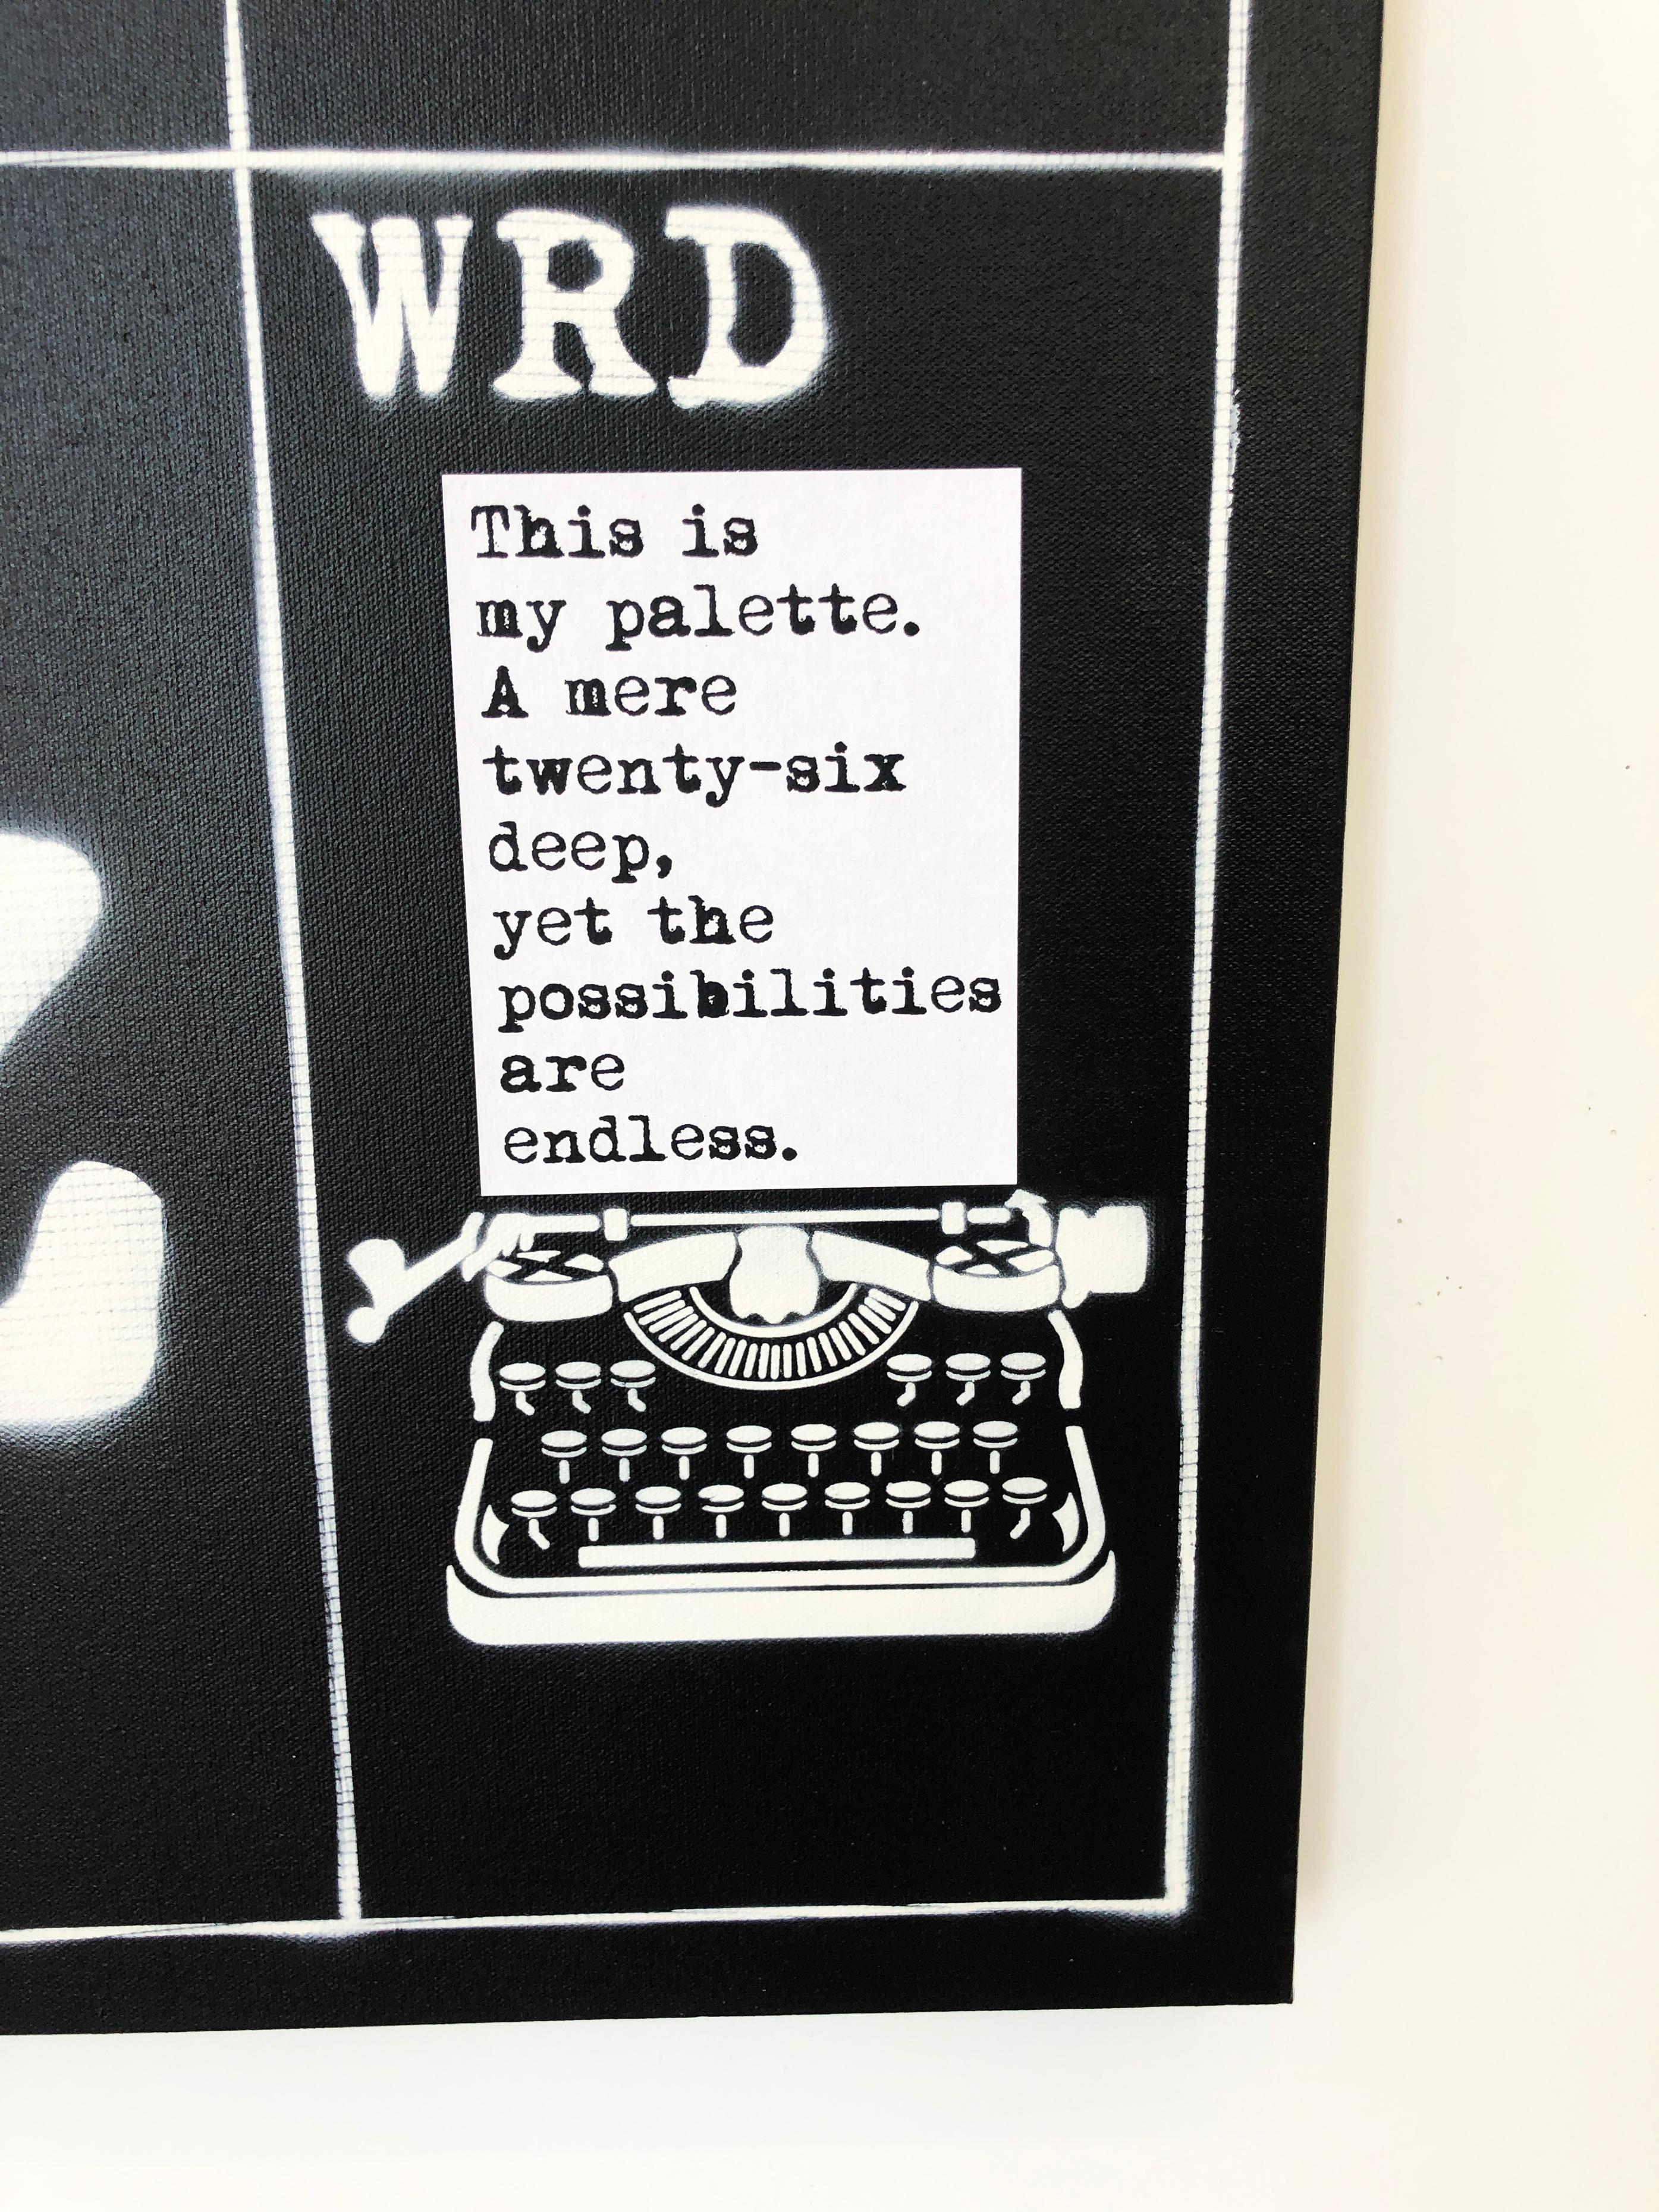  “My Palette”- acrylic spray paint stencil on canvas  - Contemporary Painting by WRDSMTH